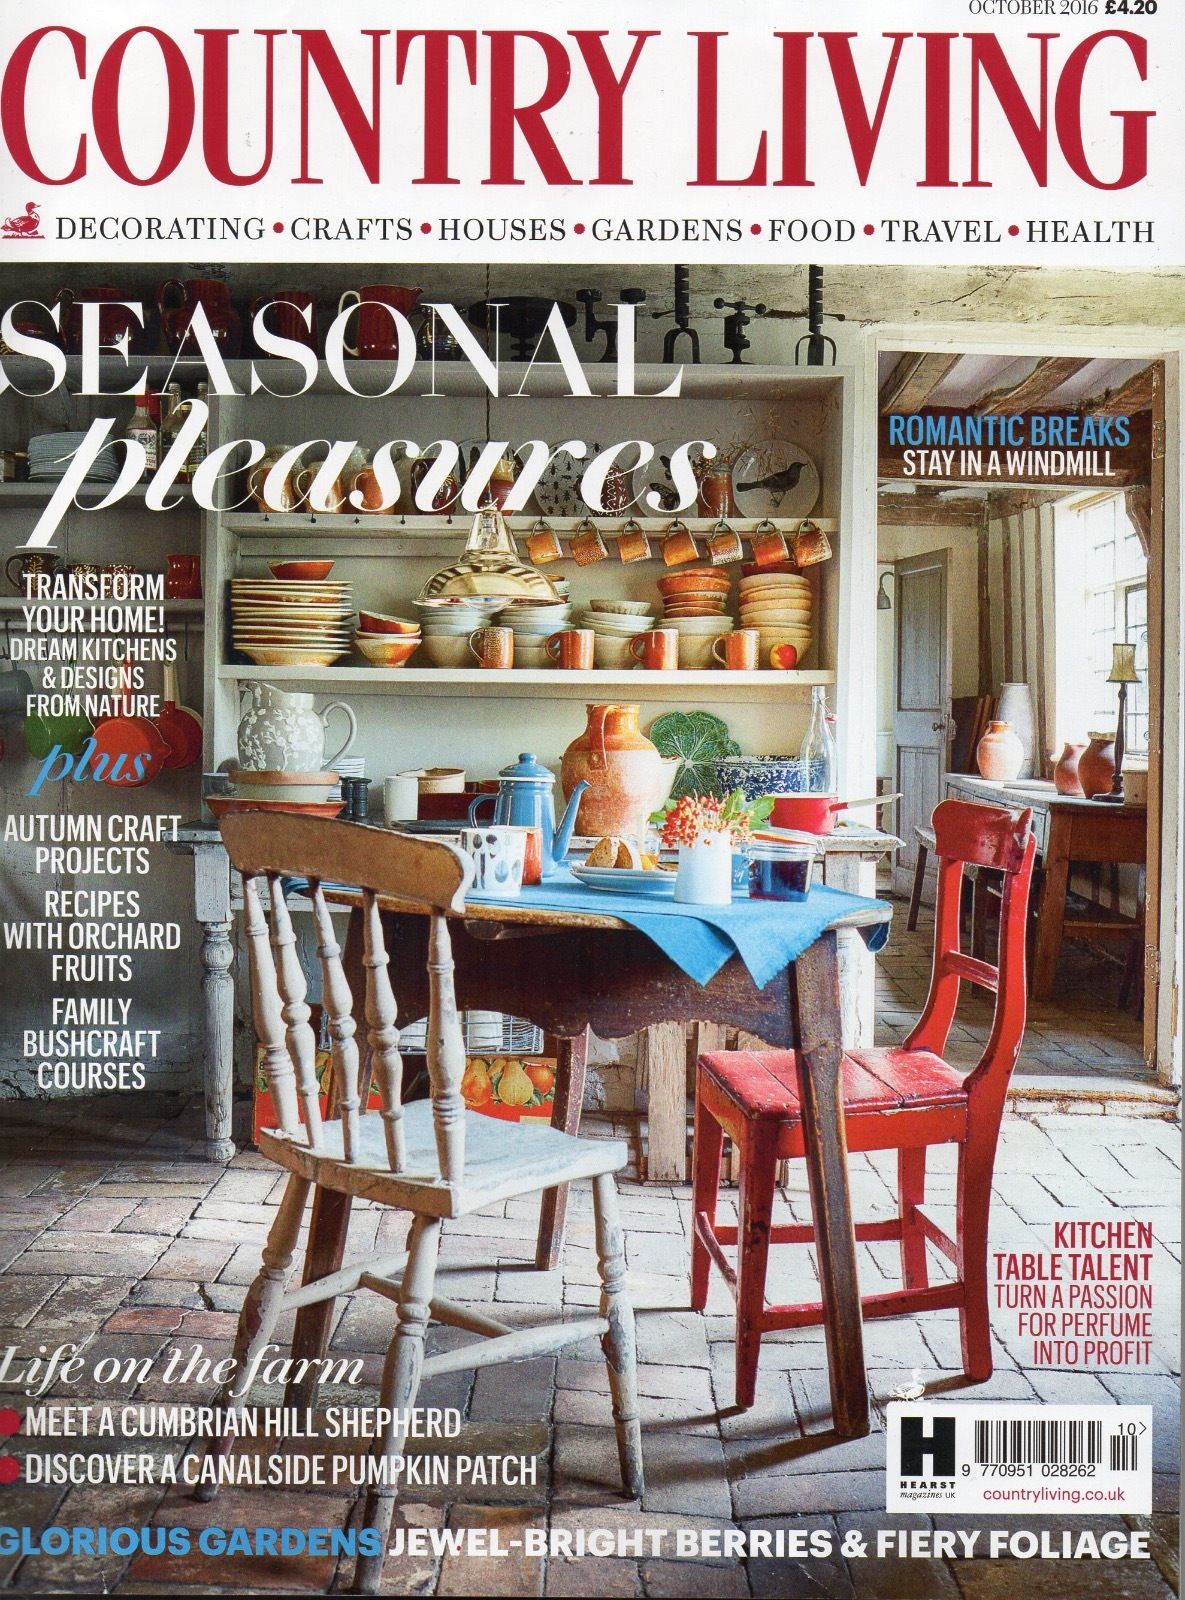 Our Sissinghurst Set is Featured in Country Living!